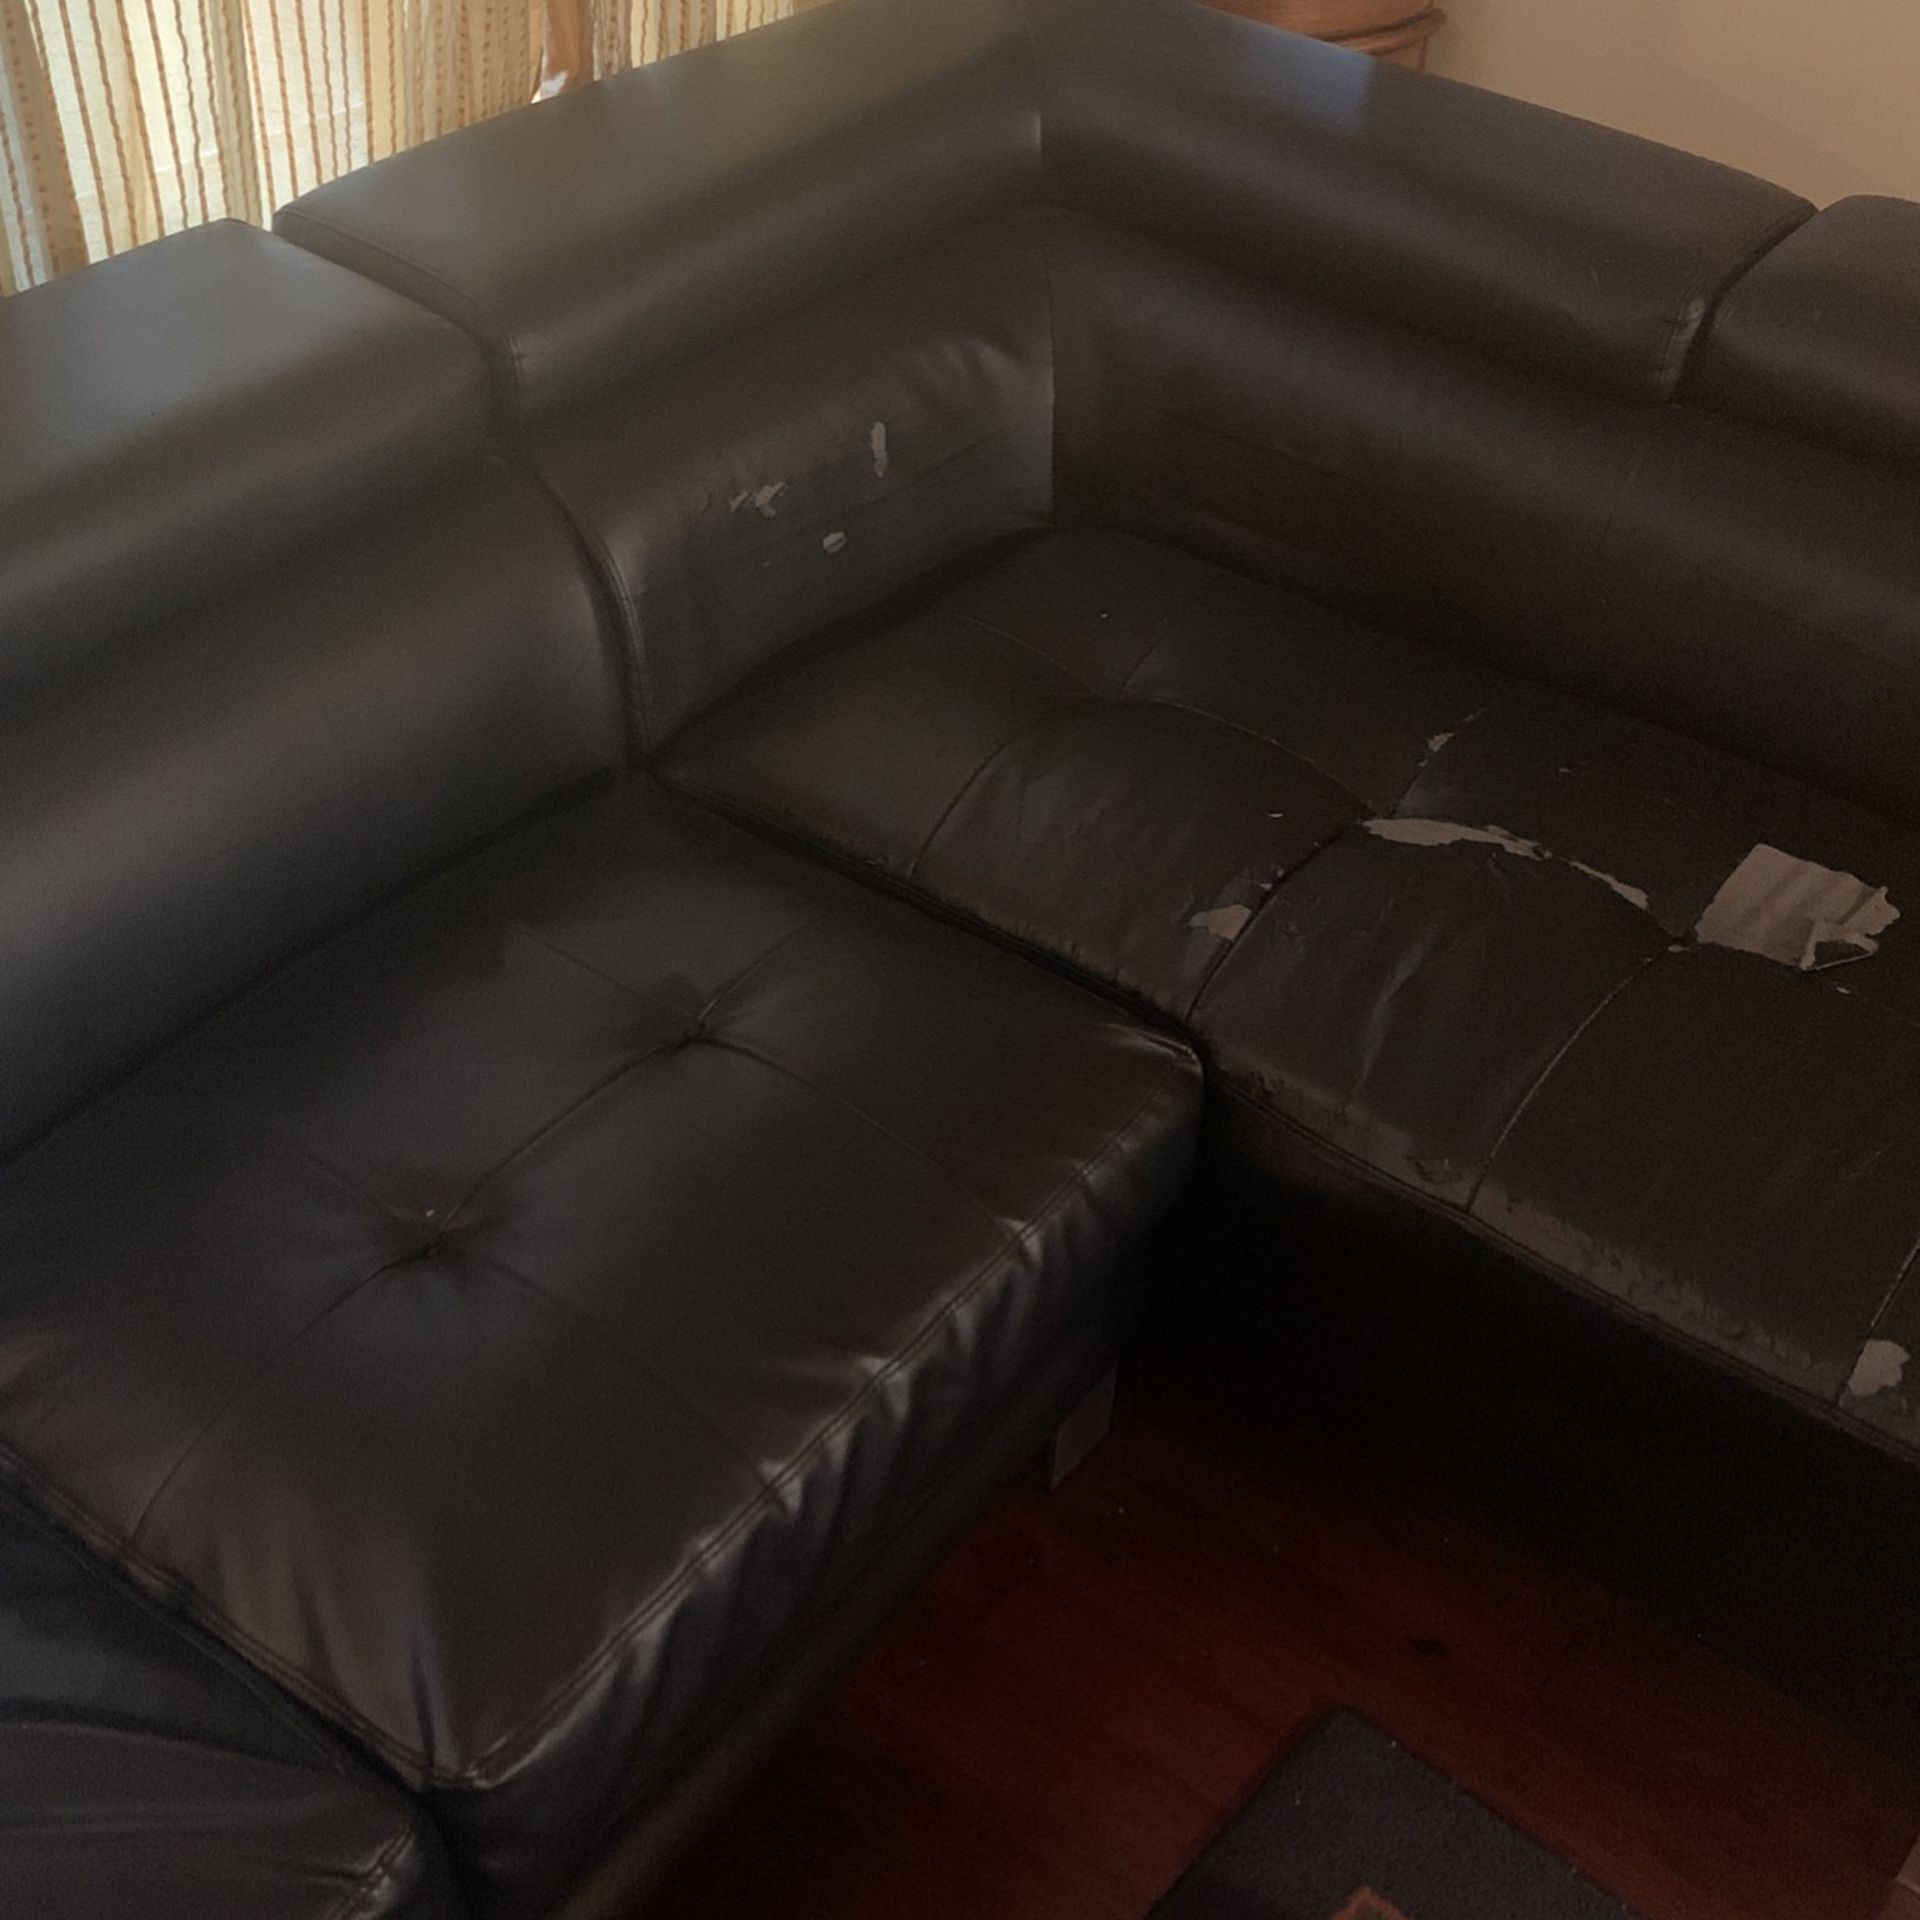 Black Couch